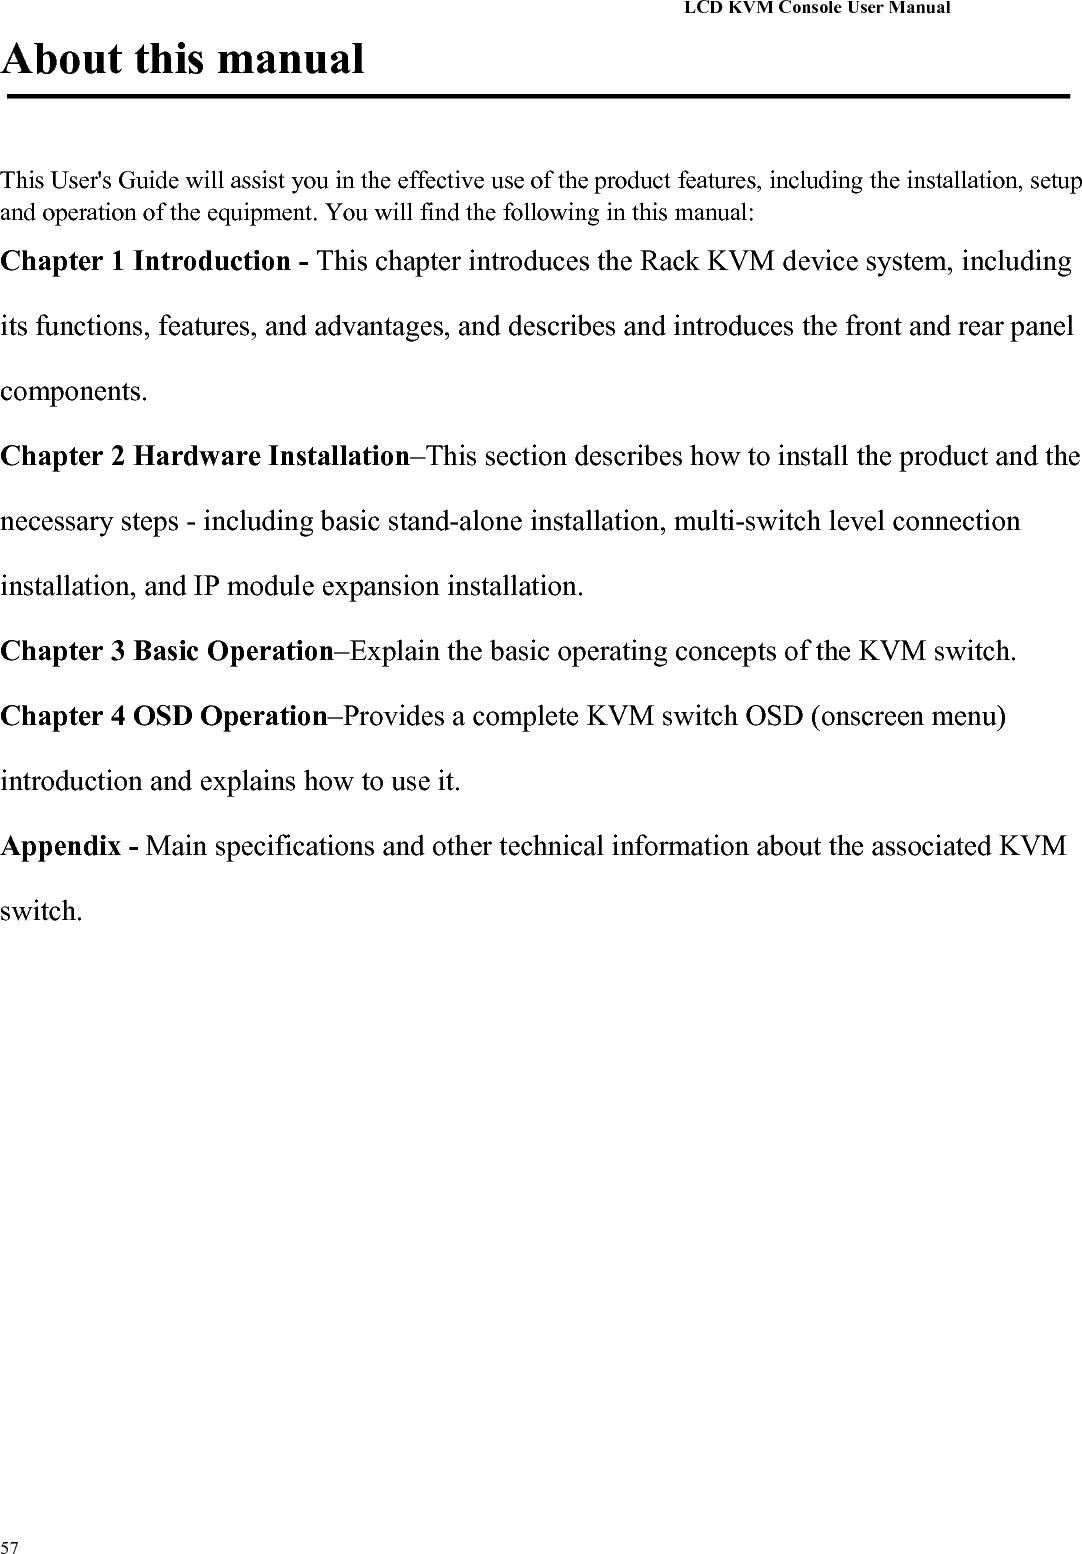 LCD KVM Console User Manual57About this manualThis User&apos;s Guide will assist you in the effective use of the product features, including the installation, setupand operation of the equipment. You will find the following in this manual:Chapter 1 Introduction - This chapter introduces the Rack KVM device system, includingits functions, features, and advantages, and describes and introduces the front and rear panelcomponents.Chapter 2 Hardware Installation–This section describes how to install the product and thenecessary steps - including basic stand-alone installation, multi-switch level connectioninstallation, and IP module expansion installation.Chapter 3 Basic Operation–Explain the basic operating concepts of the KVM switch.Chapter 4 OSD Operation–Provides a complete KVM switch OSD (onscreen menu)introduction and explains how to use it.Appendix - Main specifications and other technical information about the associated KVMswitch.